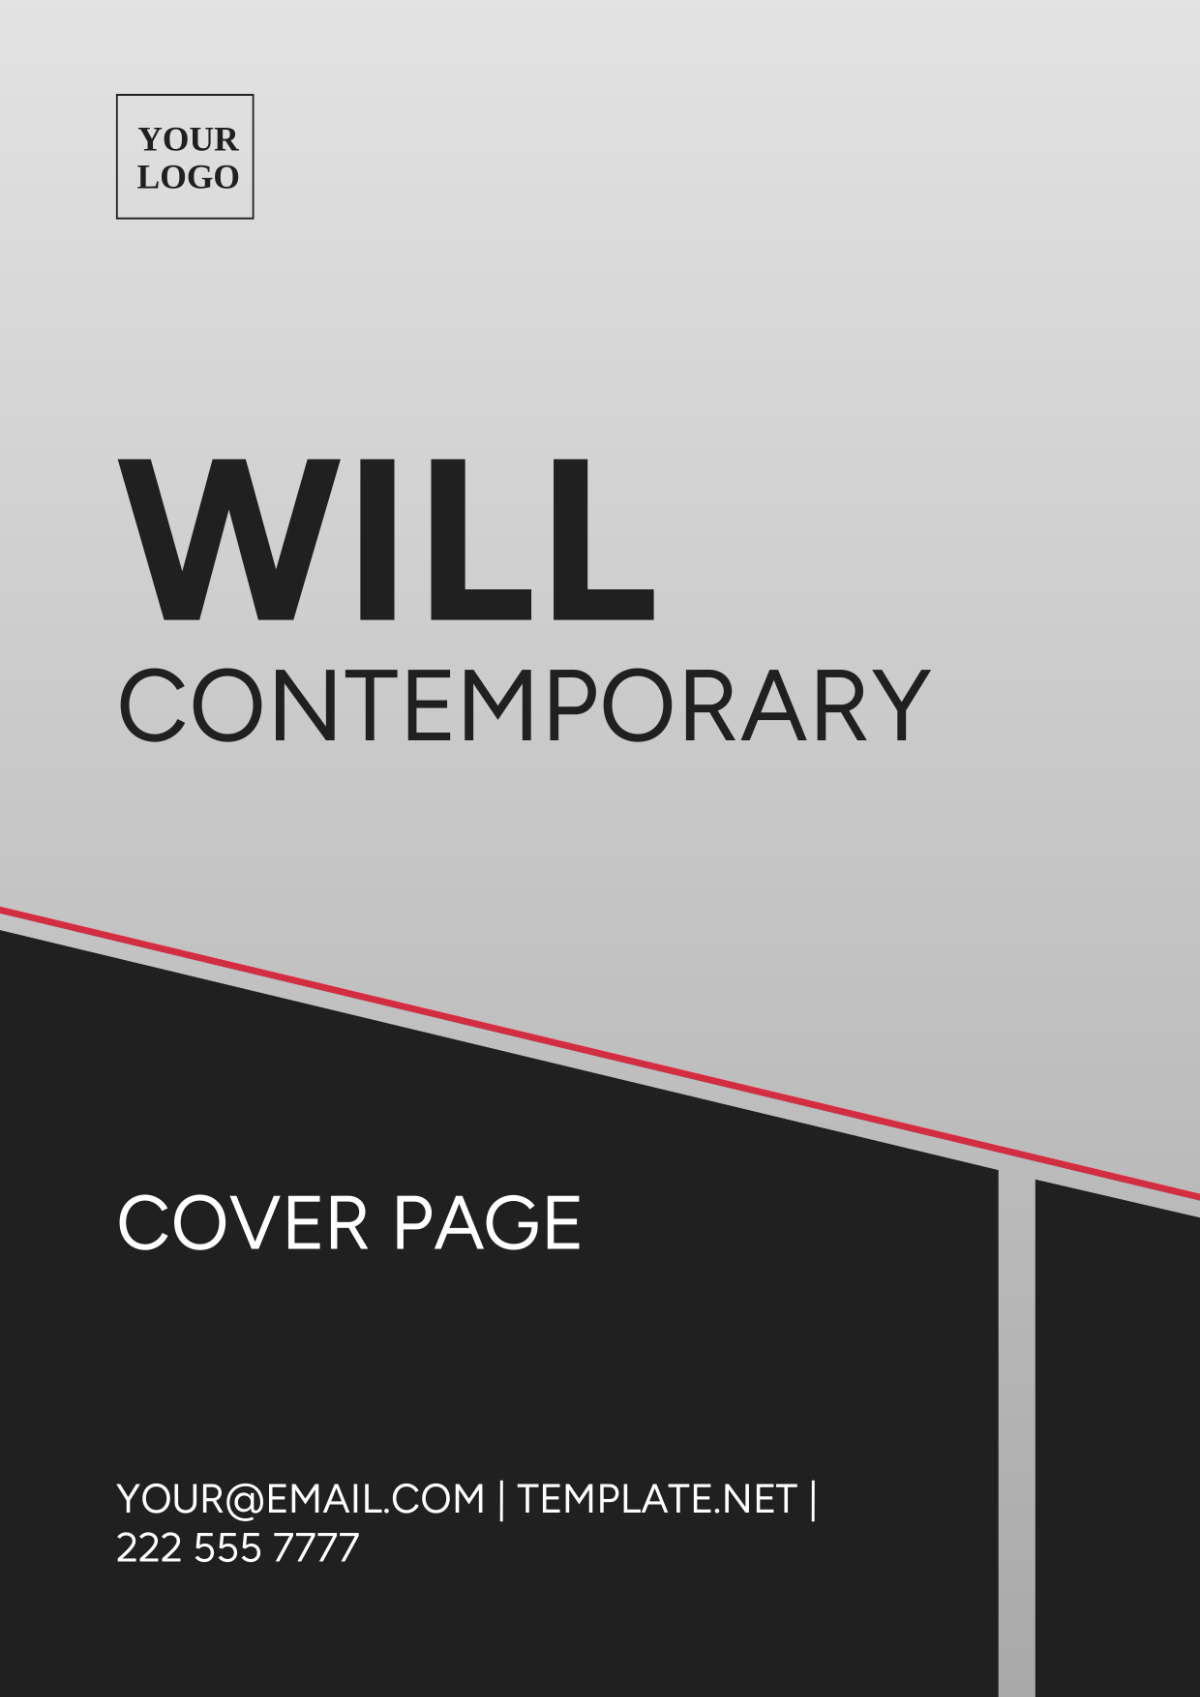 Will Contemporary Cover Page Template